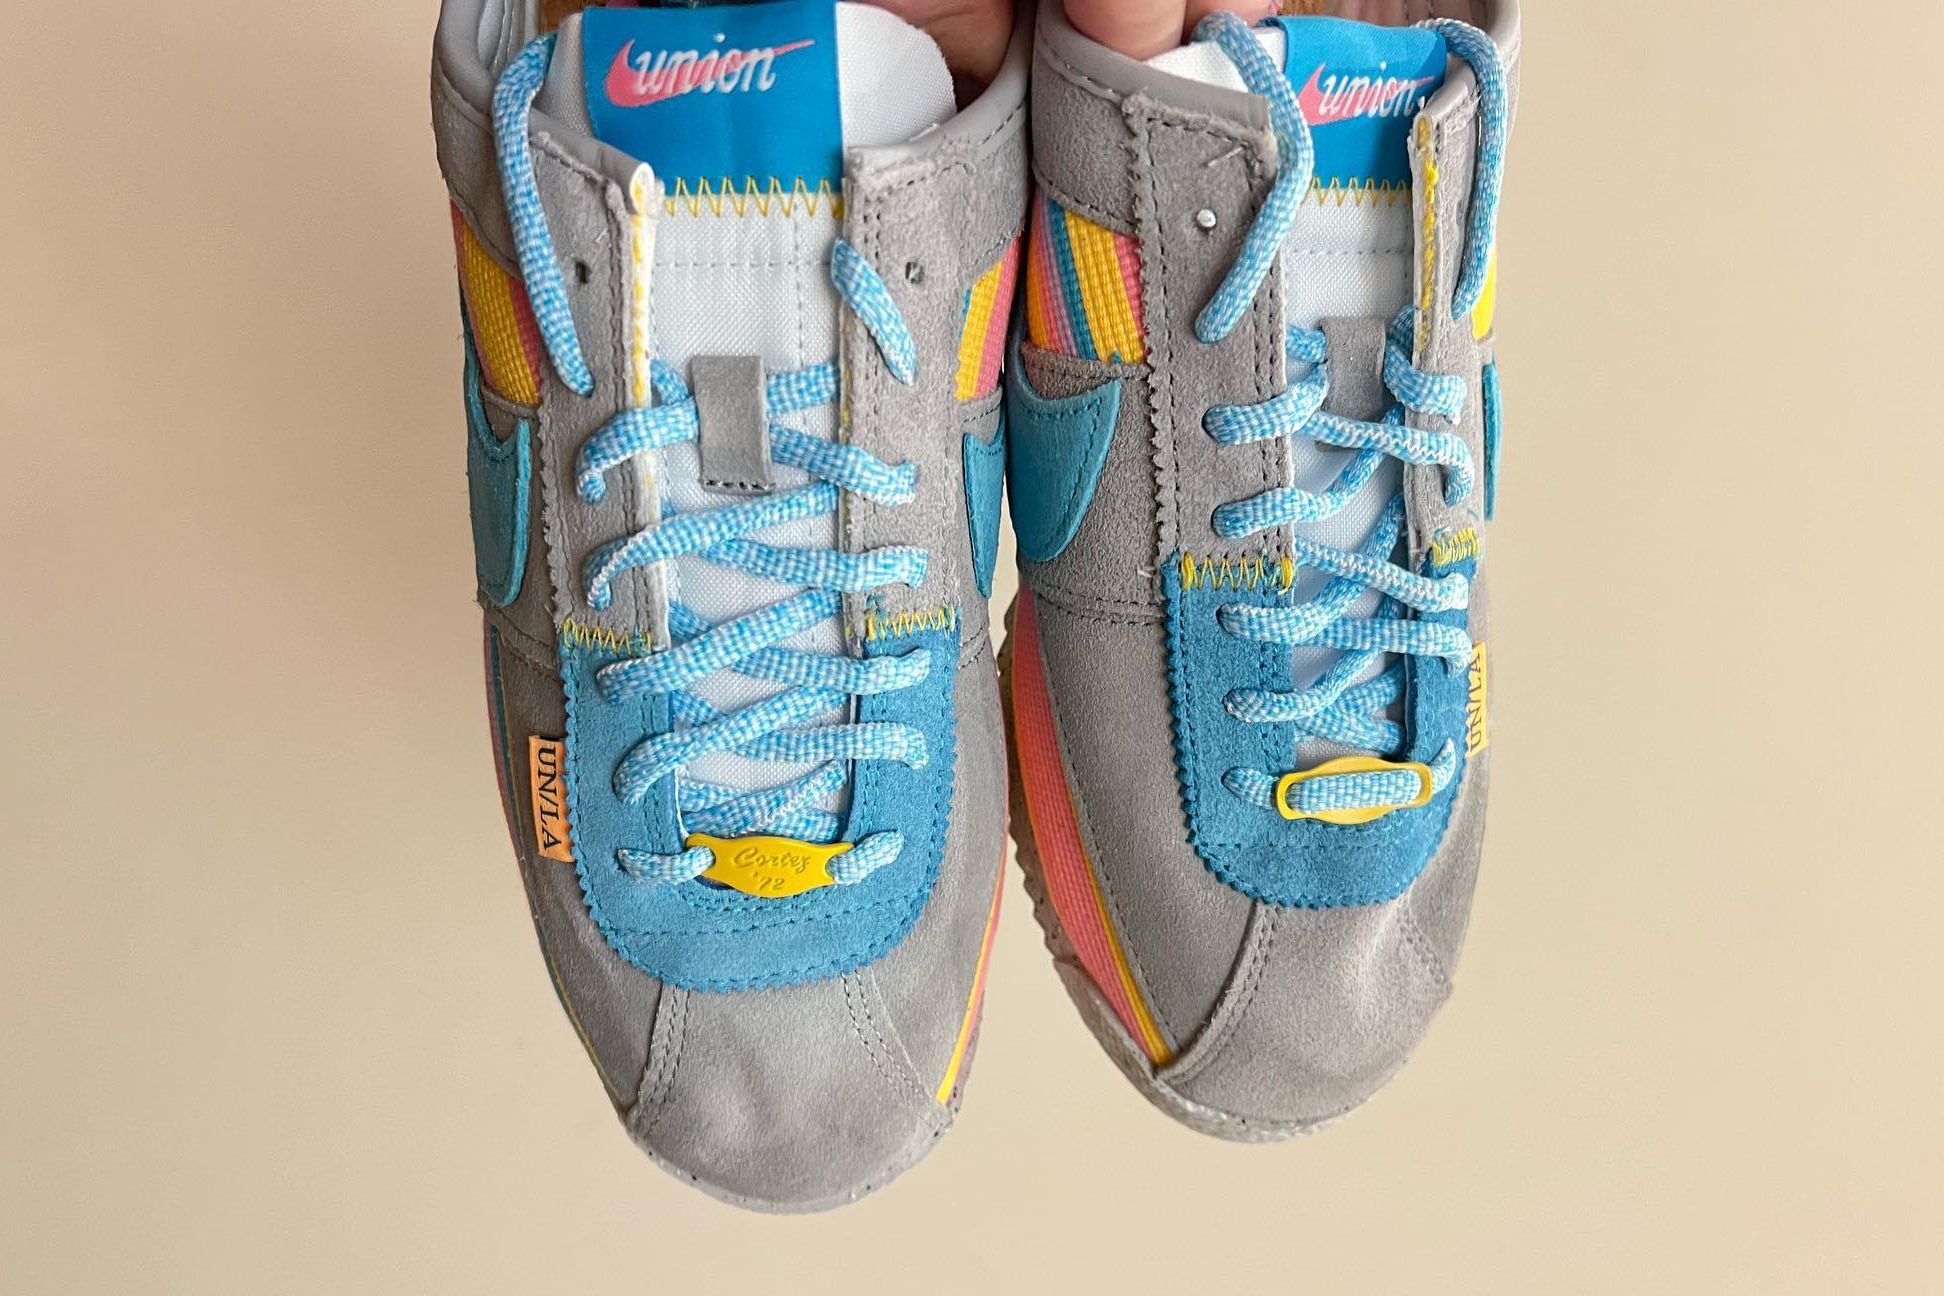 Custom Louis Vuitton x Nike Cortez runners for Sale in Scotts Valley